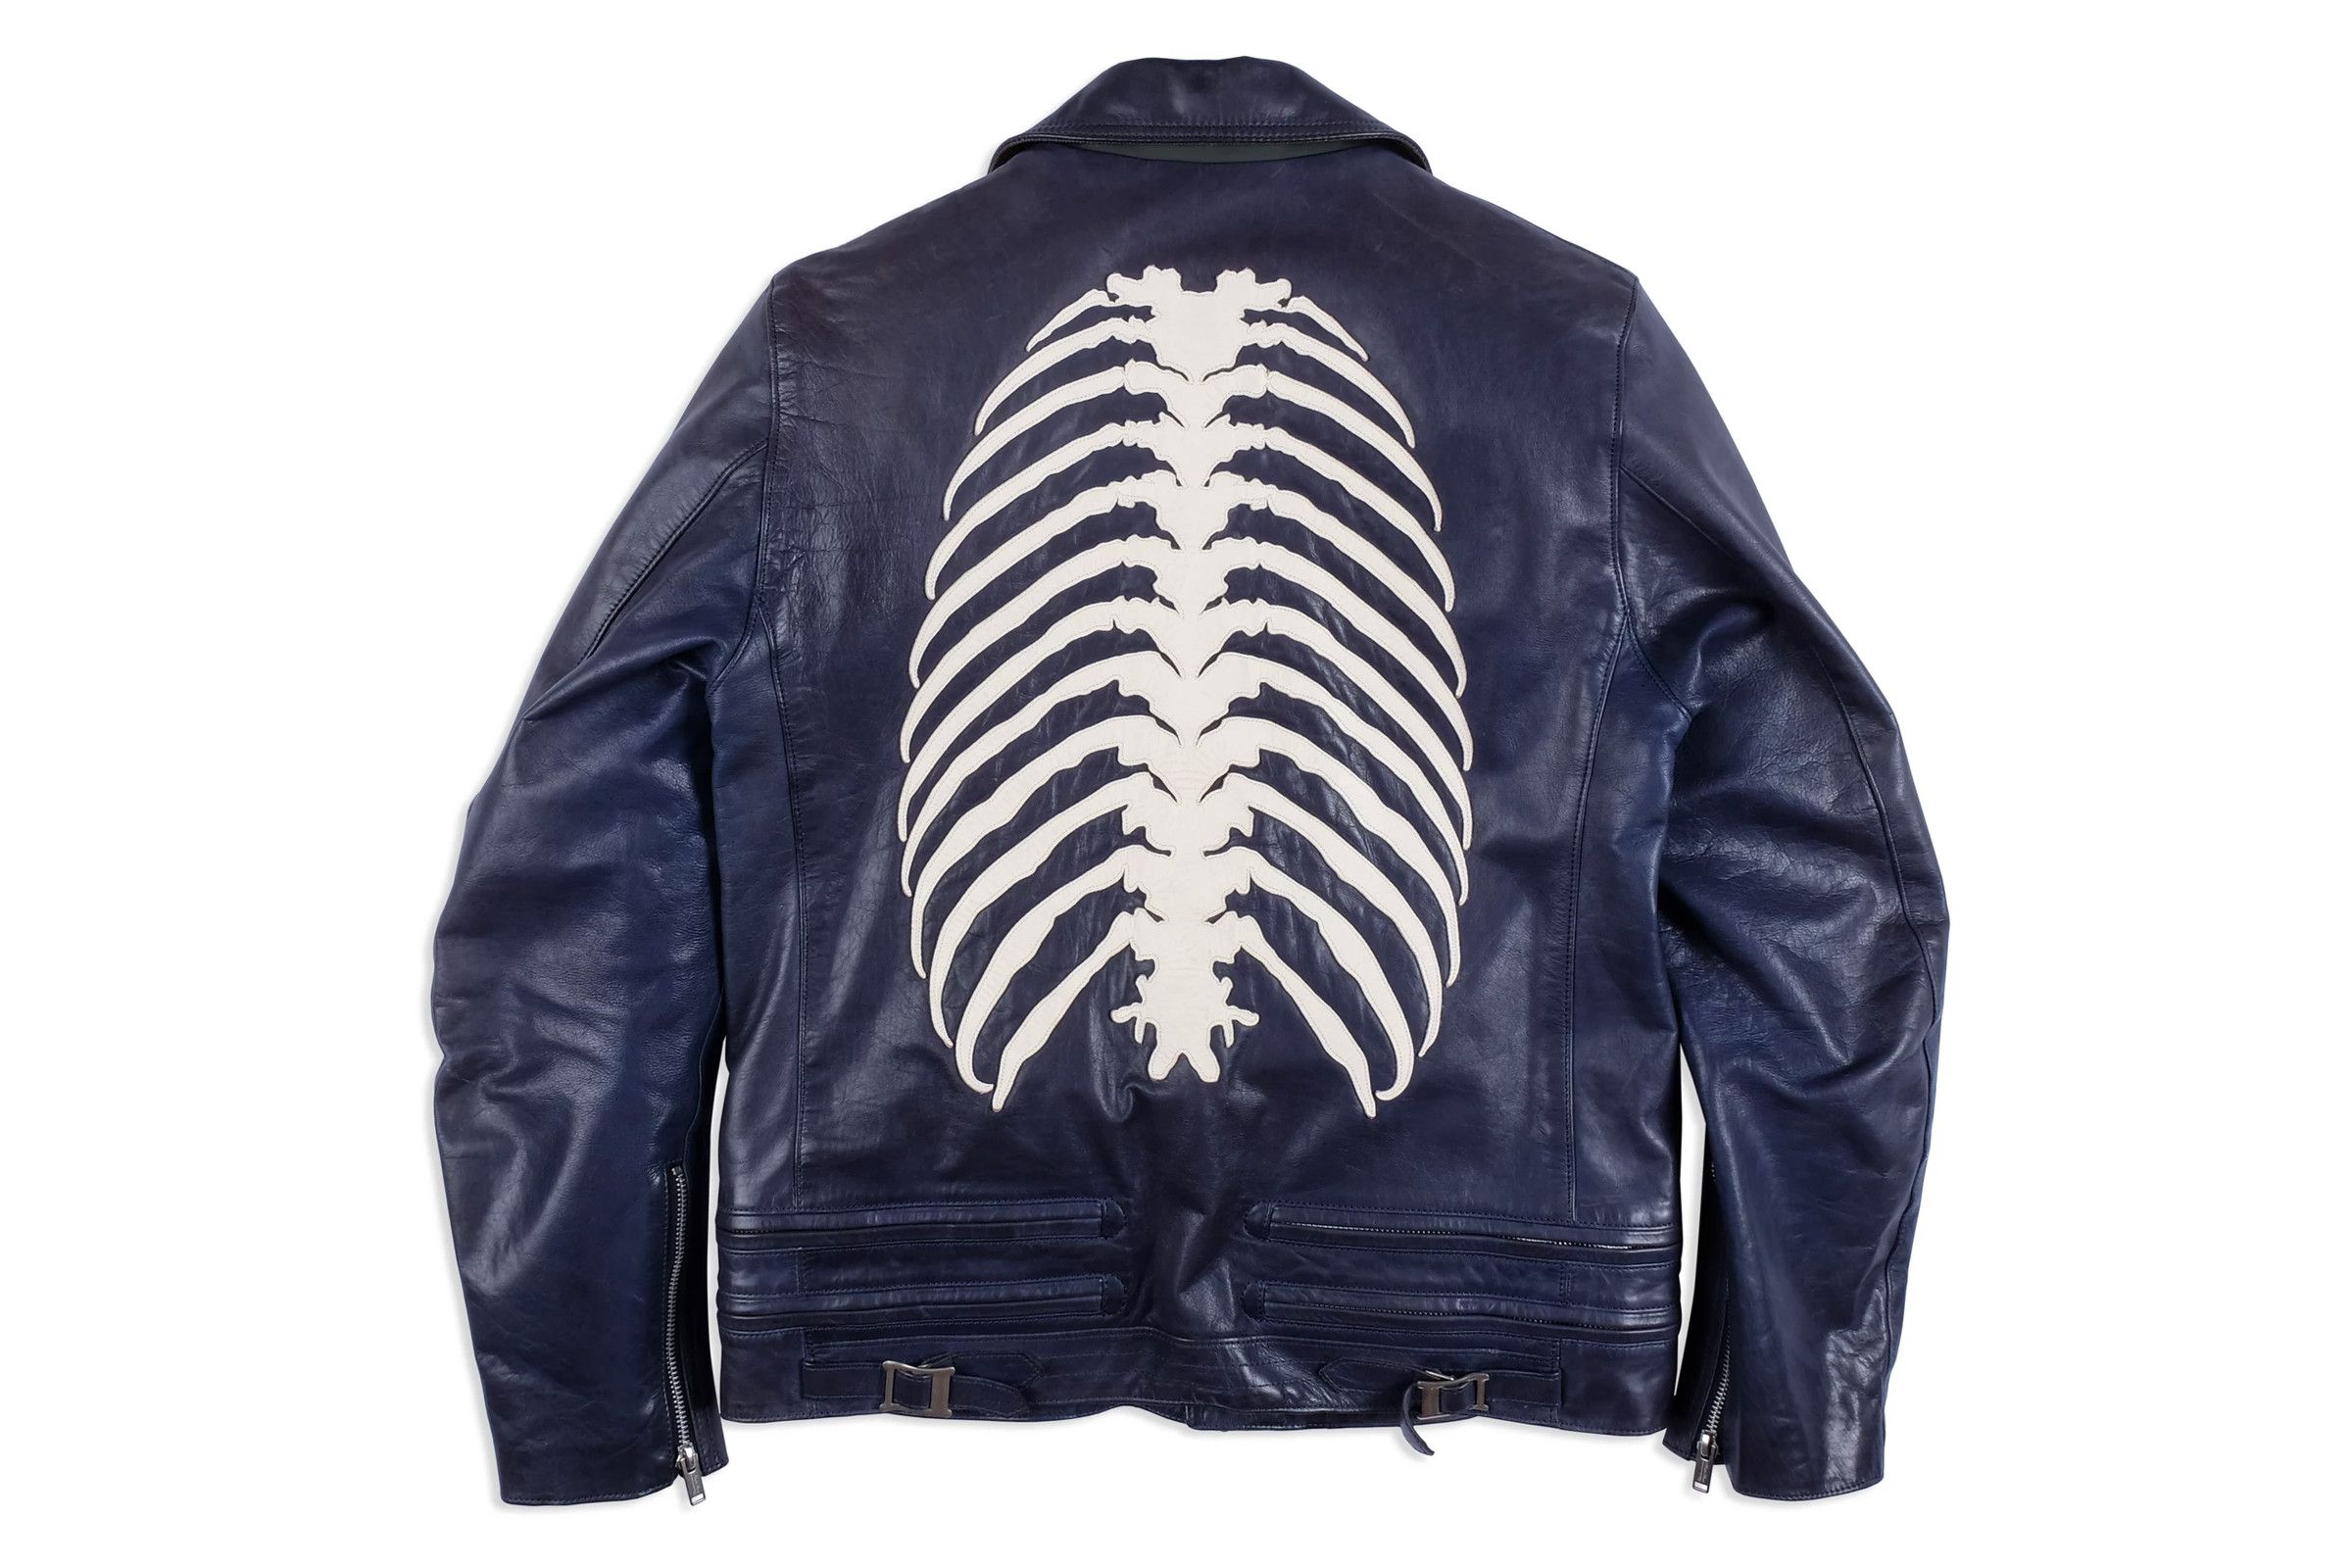 Undercover "Anatomicouture" Leather Jacket